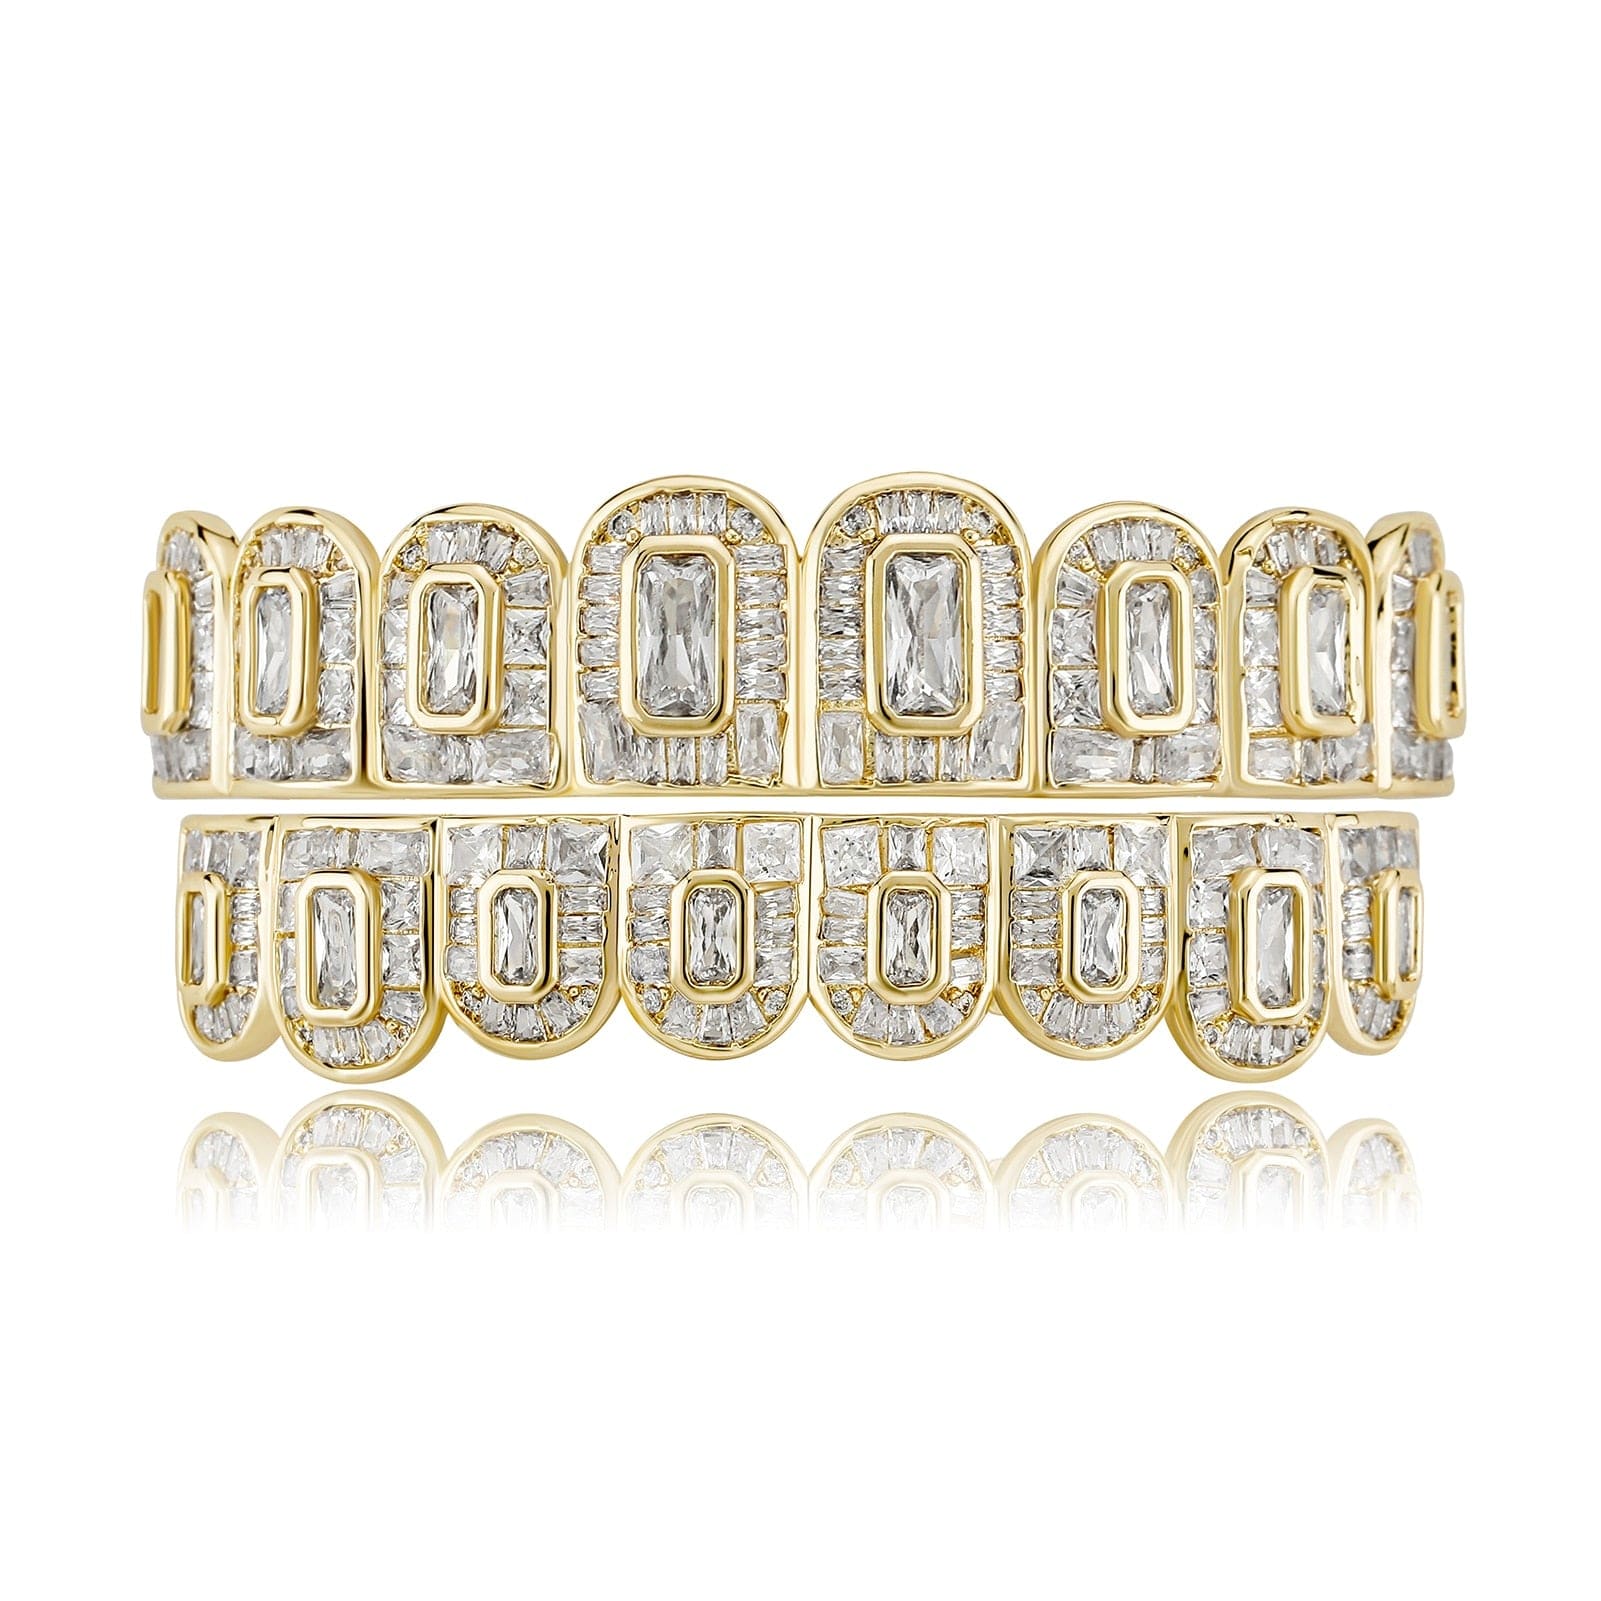 VVS Jewelry hip hop jewelry Fully Rectangle Cut Baguette Iced Out Grillz